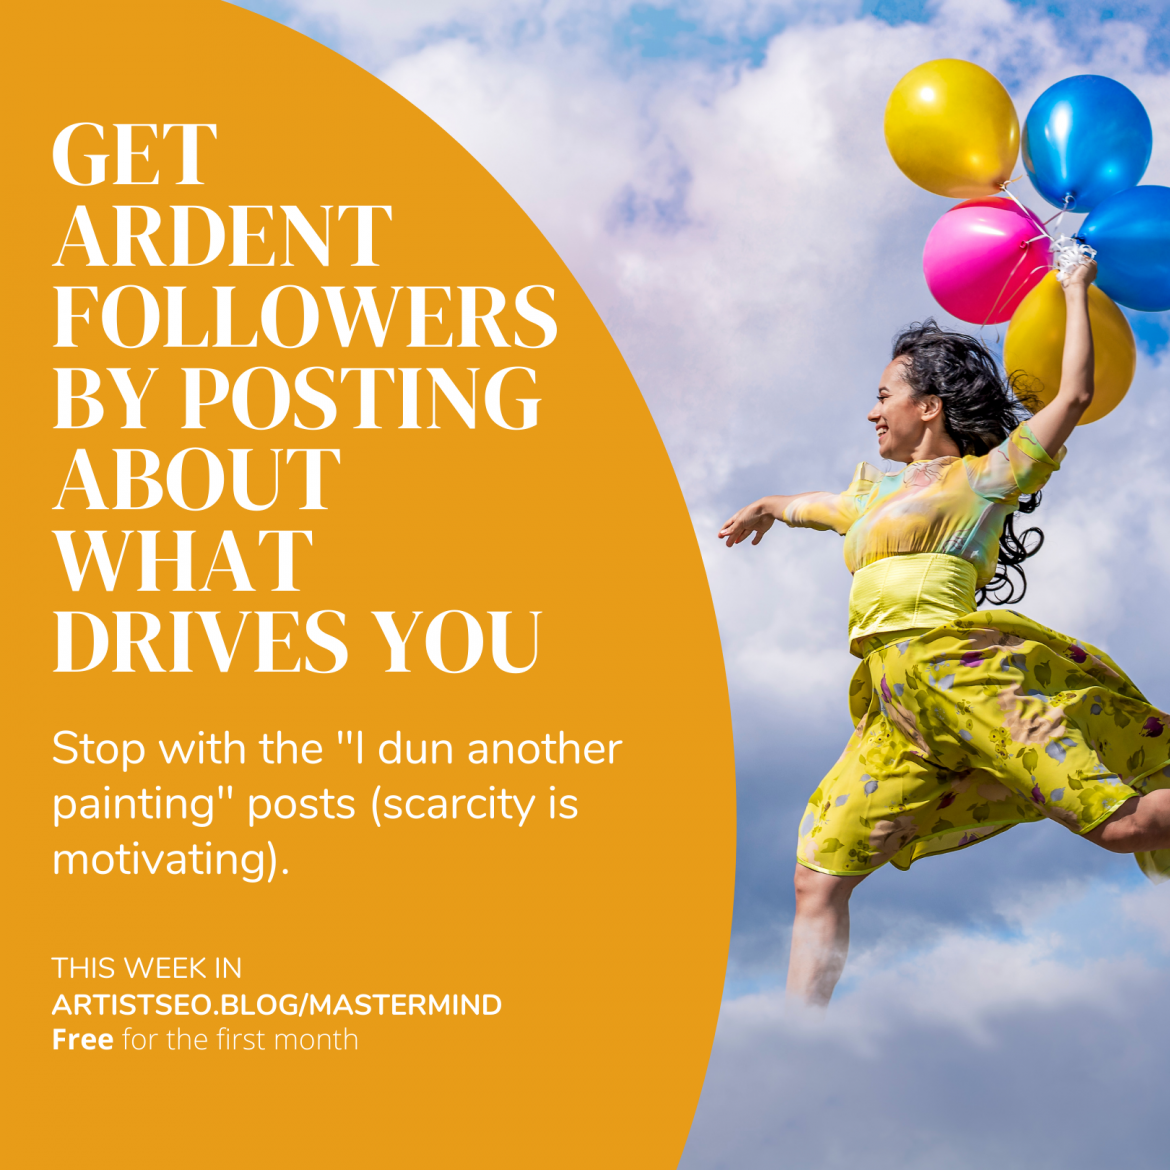 Get ardent followers by posting about what drives you